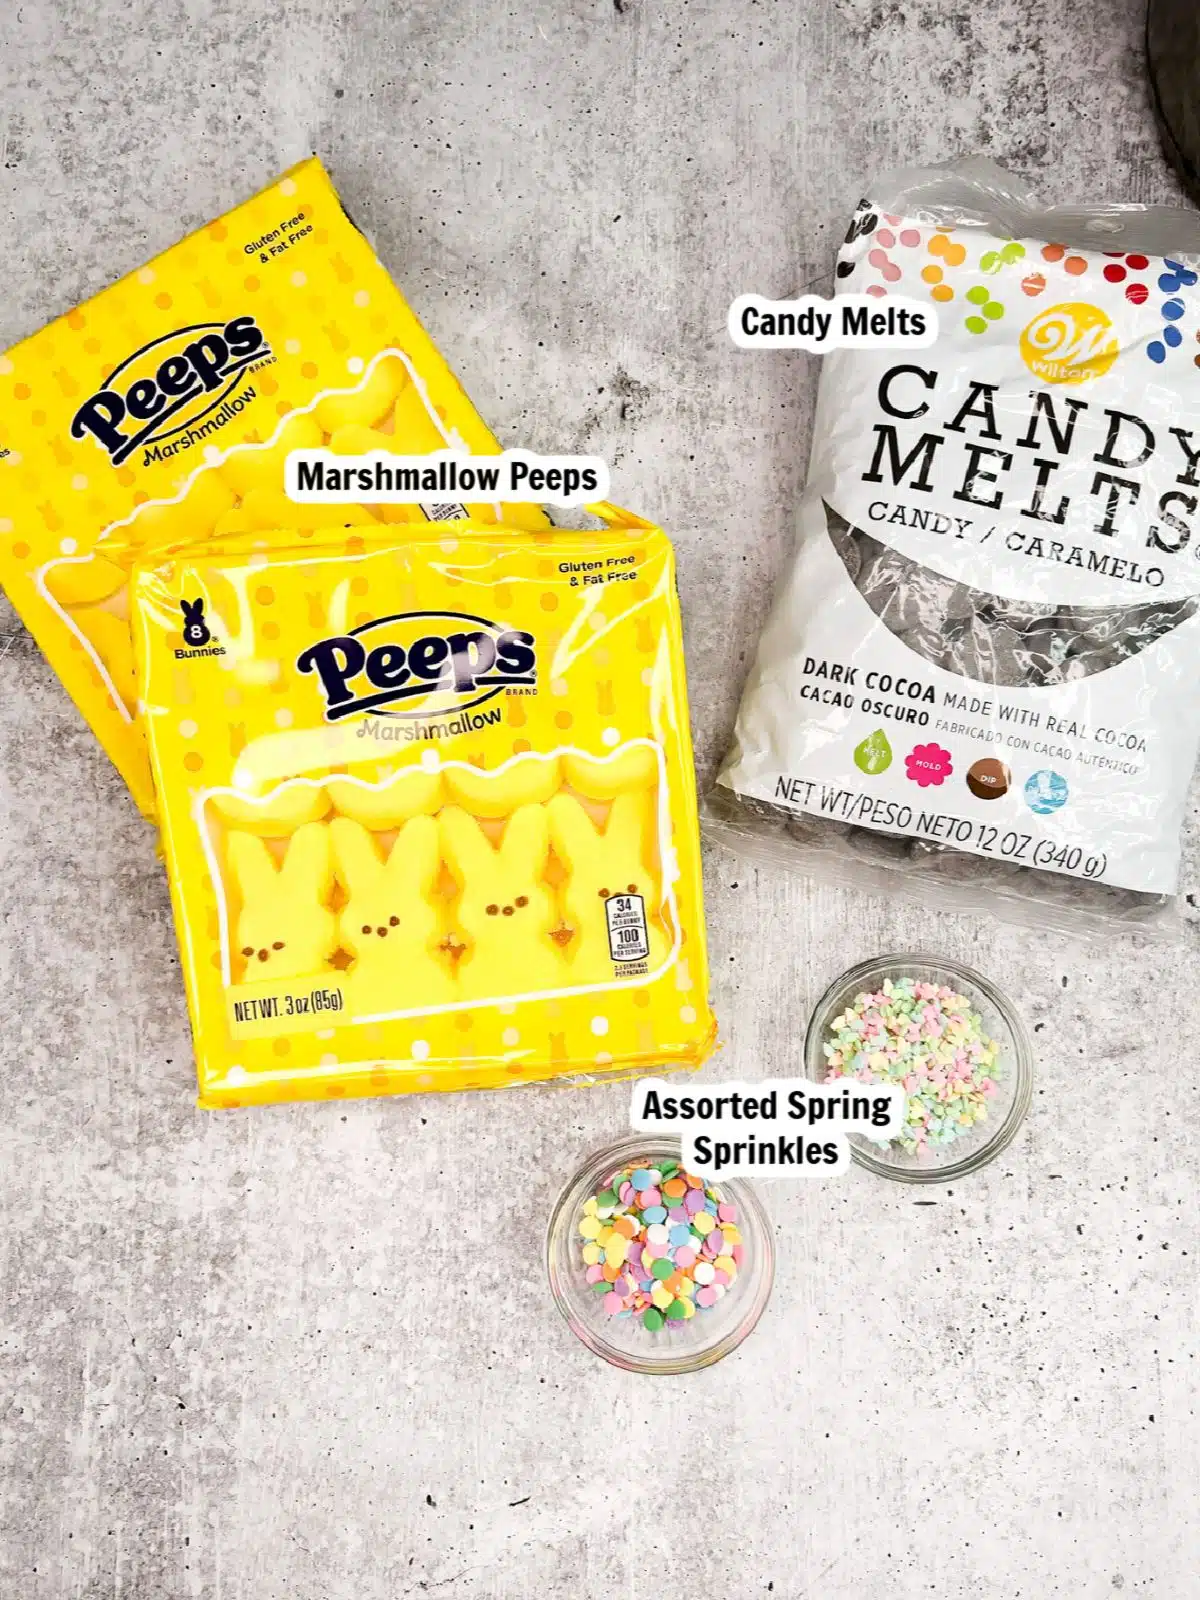 ingredients marshmallow Peeps, assorted sprinkles, candy melts.